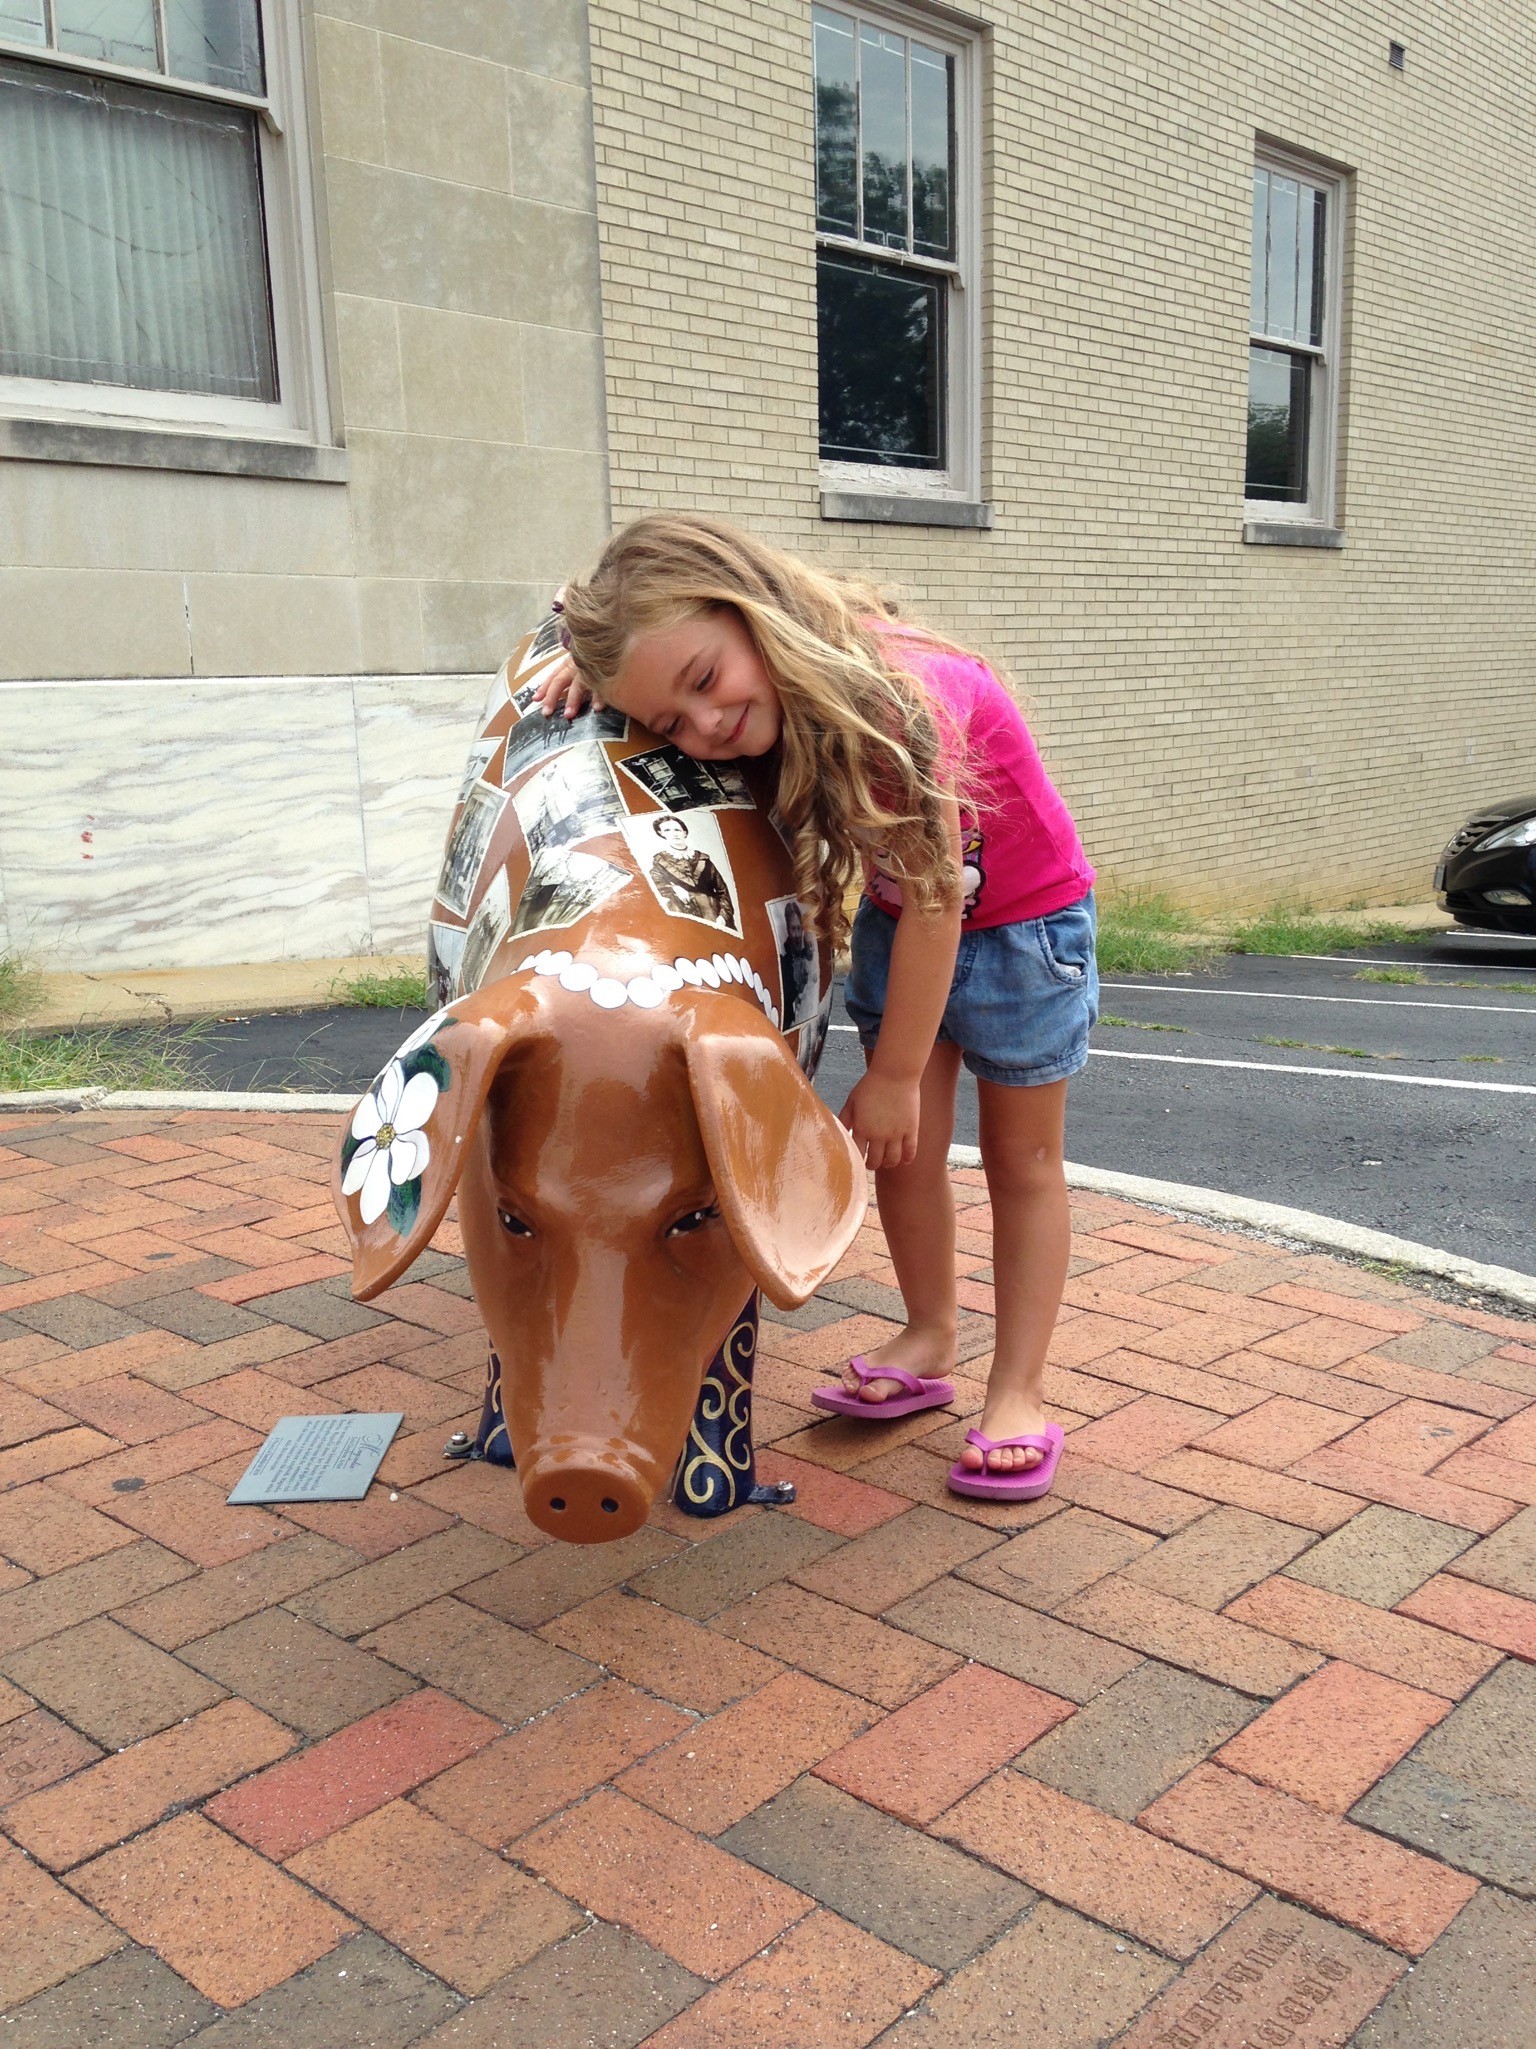 Smithfield’s Porcine Parade & Lundeen Statues